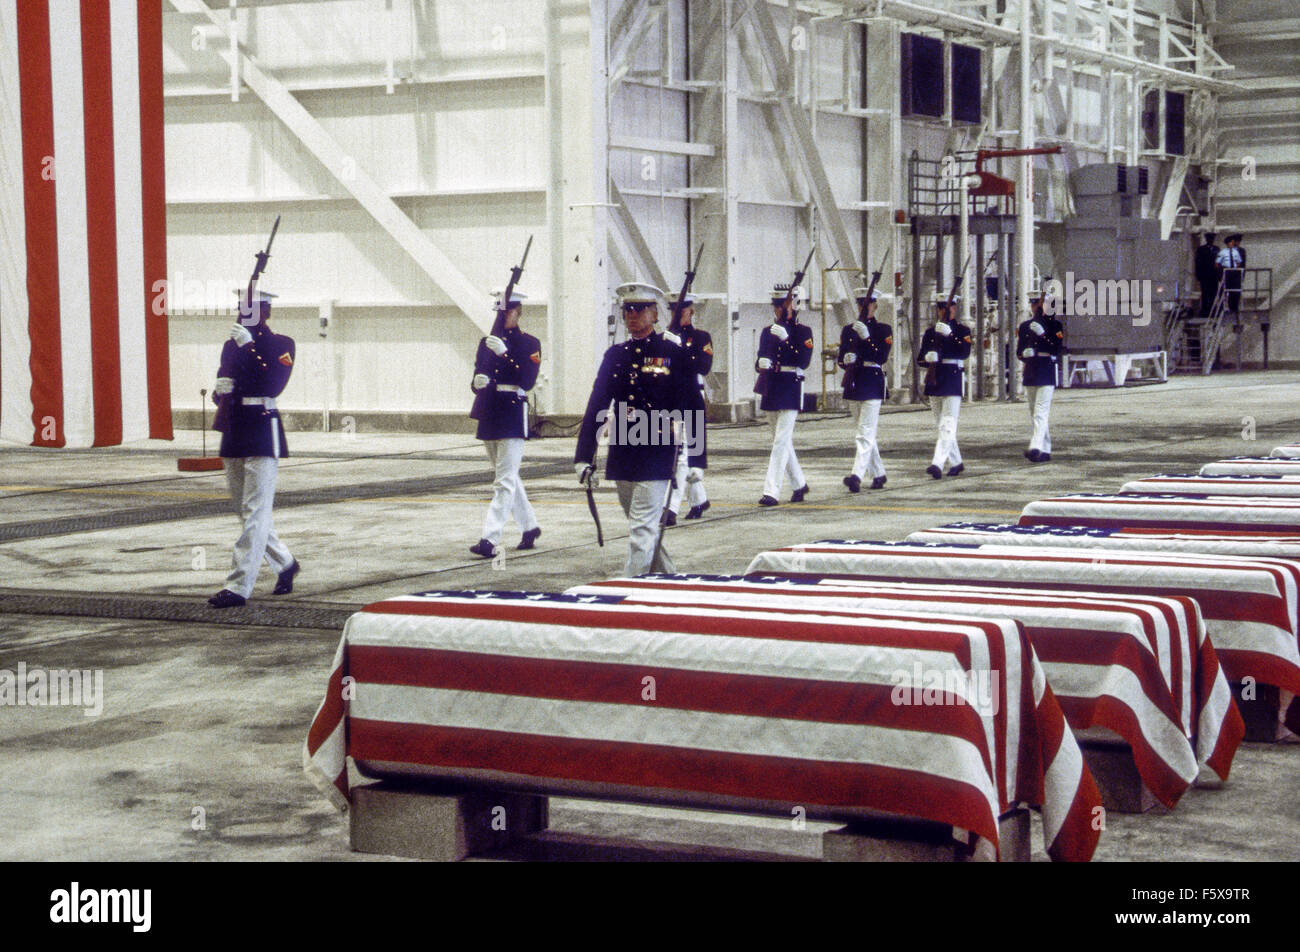 Dover Air Force Base, Delaware, USA. 29th October 1983 At precisely 7 A.M., a Marine honor guard and a color guard in ceremonial dress uniforms marched into a huge hangar at the Dover Air Force Base and stood facing 16 coffins. Behind them, suspended from the beams of the hangar, was a 38-foot American flag. The ceremony was the first on American soil honoring servicemen killed in the bombing in Beirut and the invasion of Grenada. Credit: Mark Reinstein Stock Photo